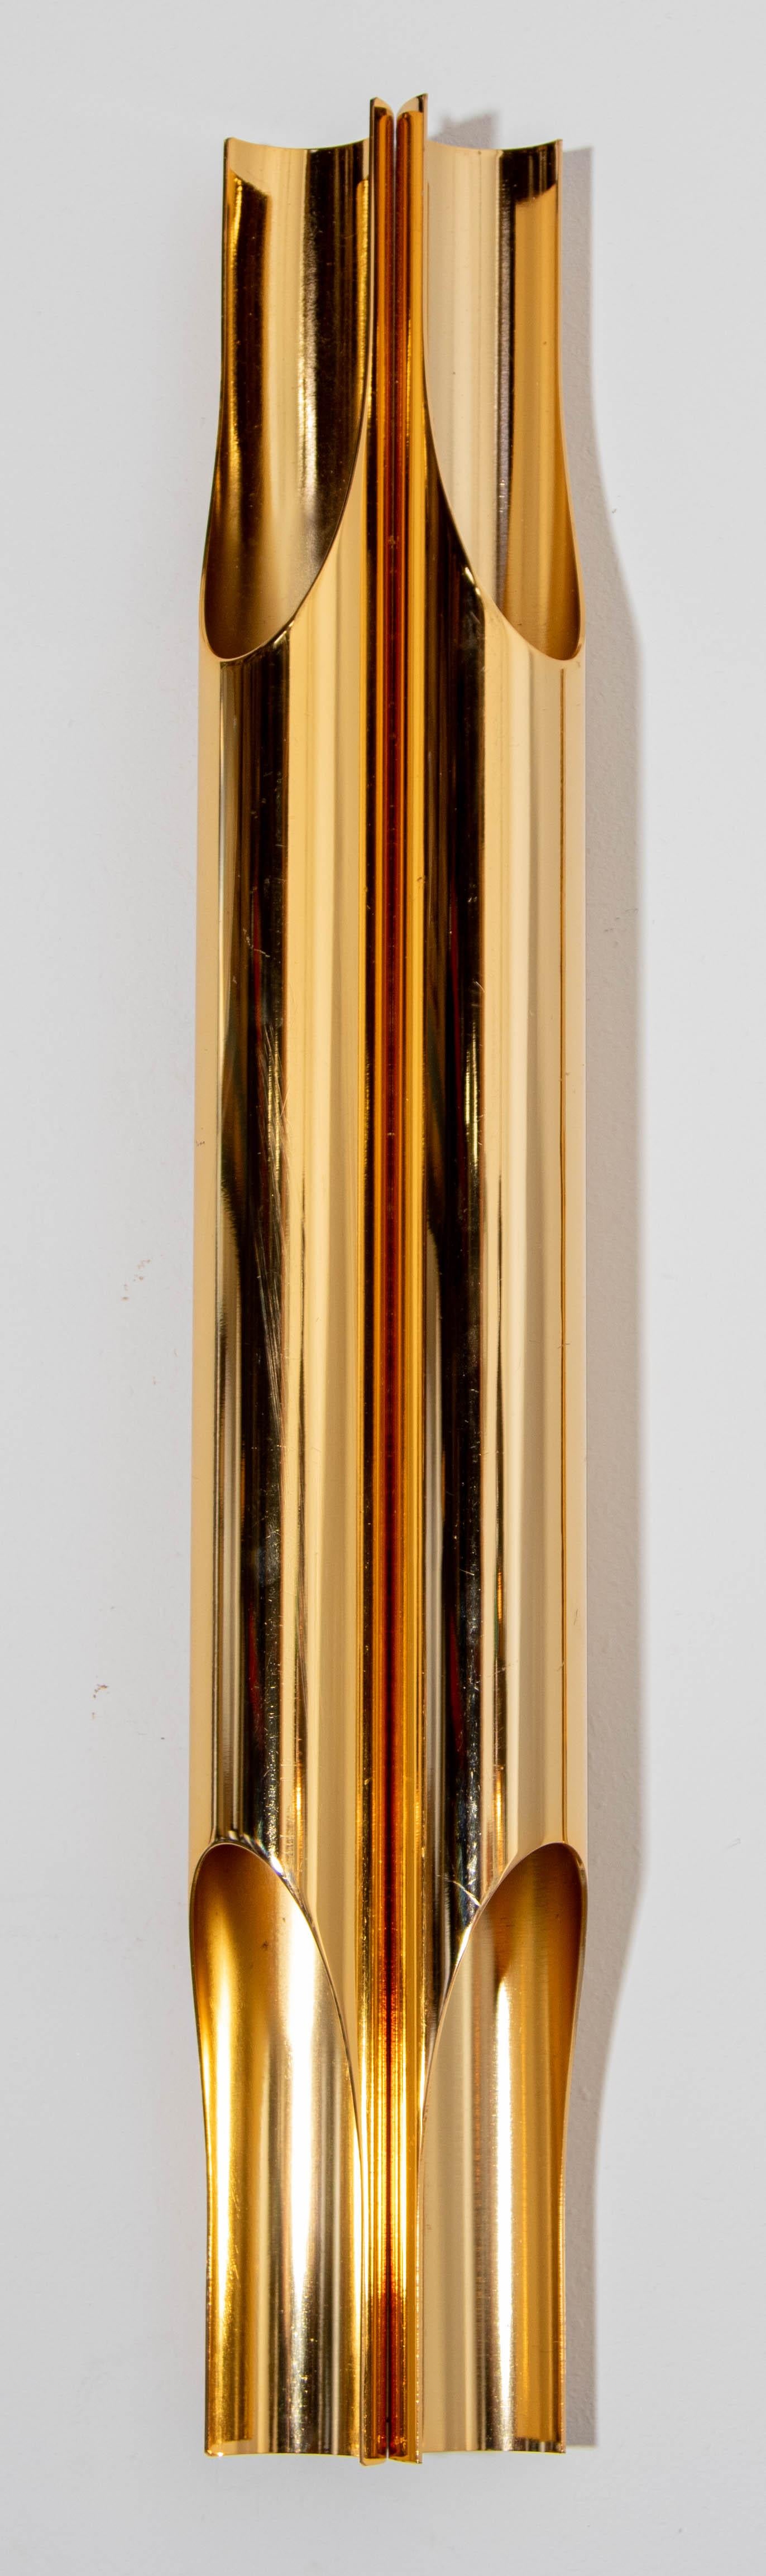 Exquisite and sophisticated, this Italian 'orgue' wall sconce boasts a polished brass finish. The interconnected pipes, crafted from polished brass metal, emit four radiant beams of light in opposing directions, offering a captivating glimpse of the